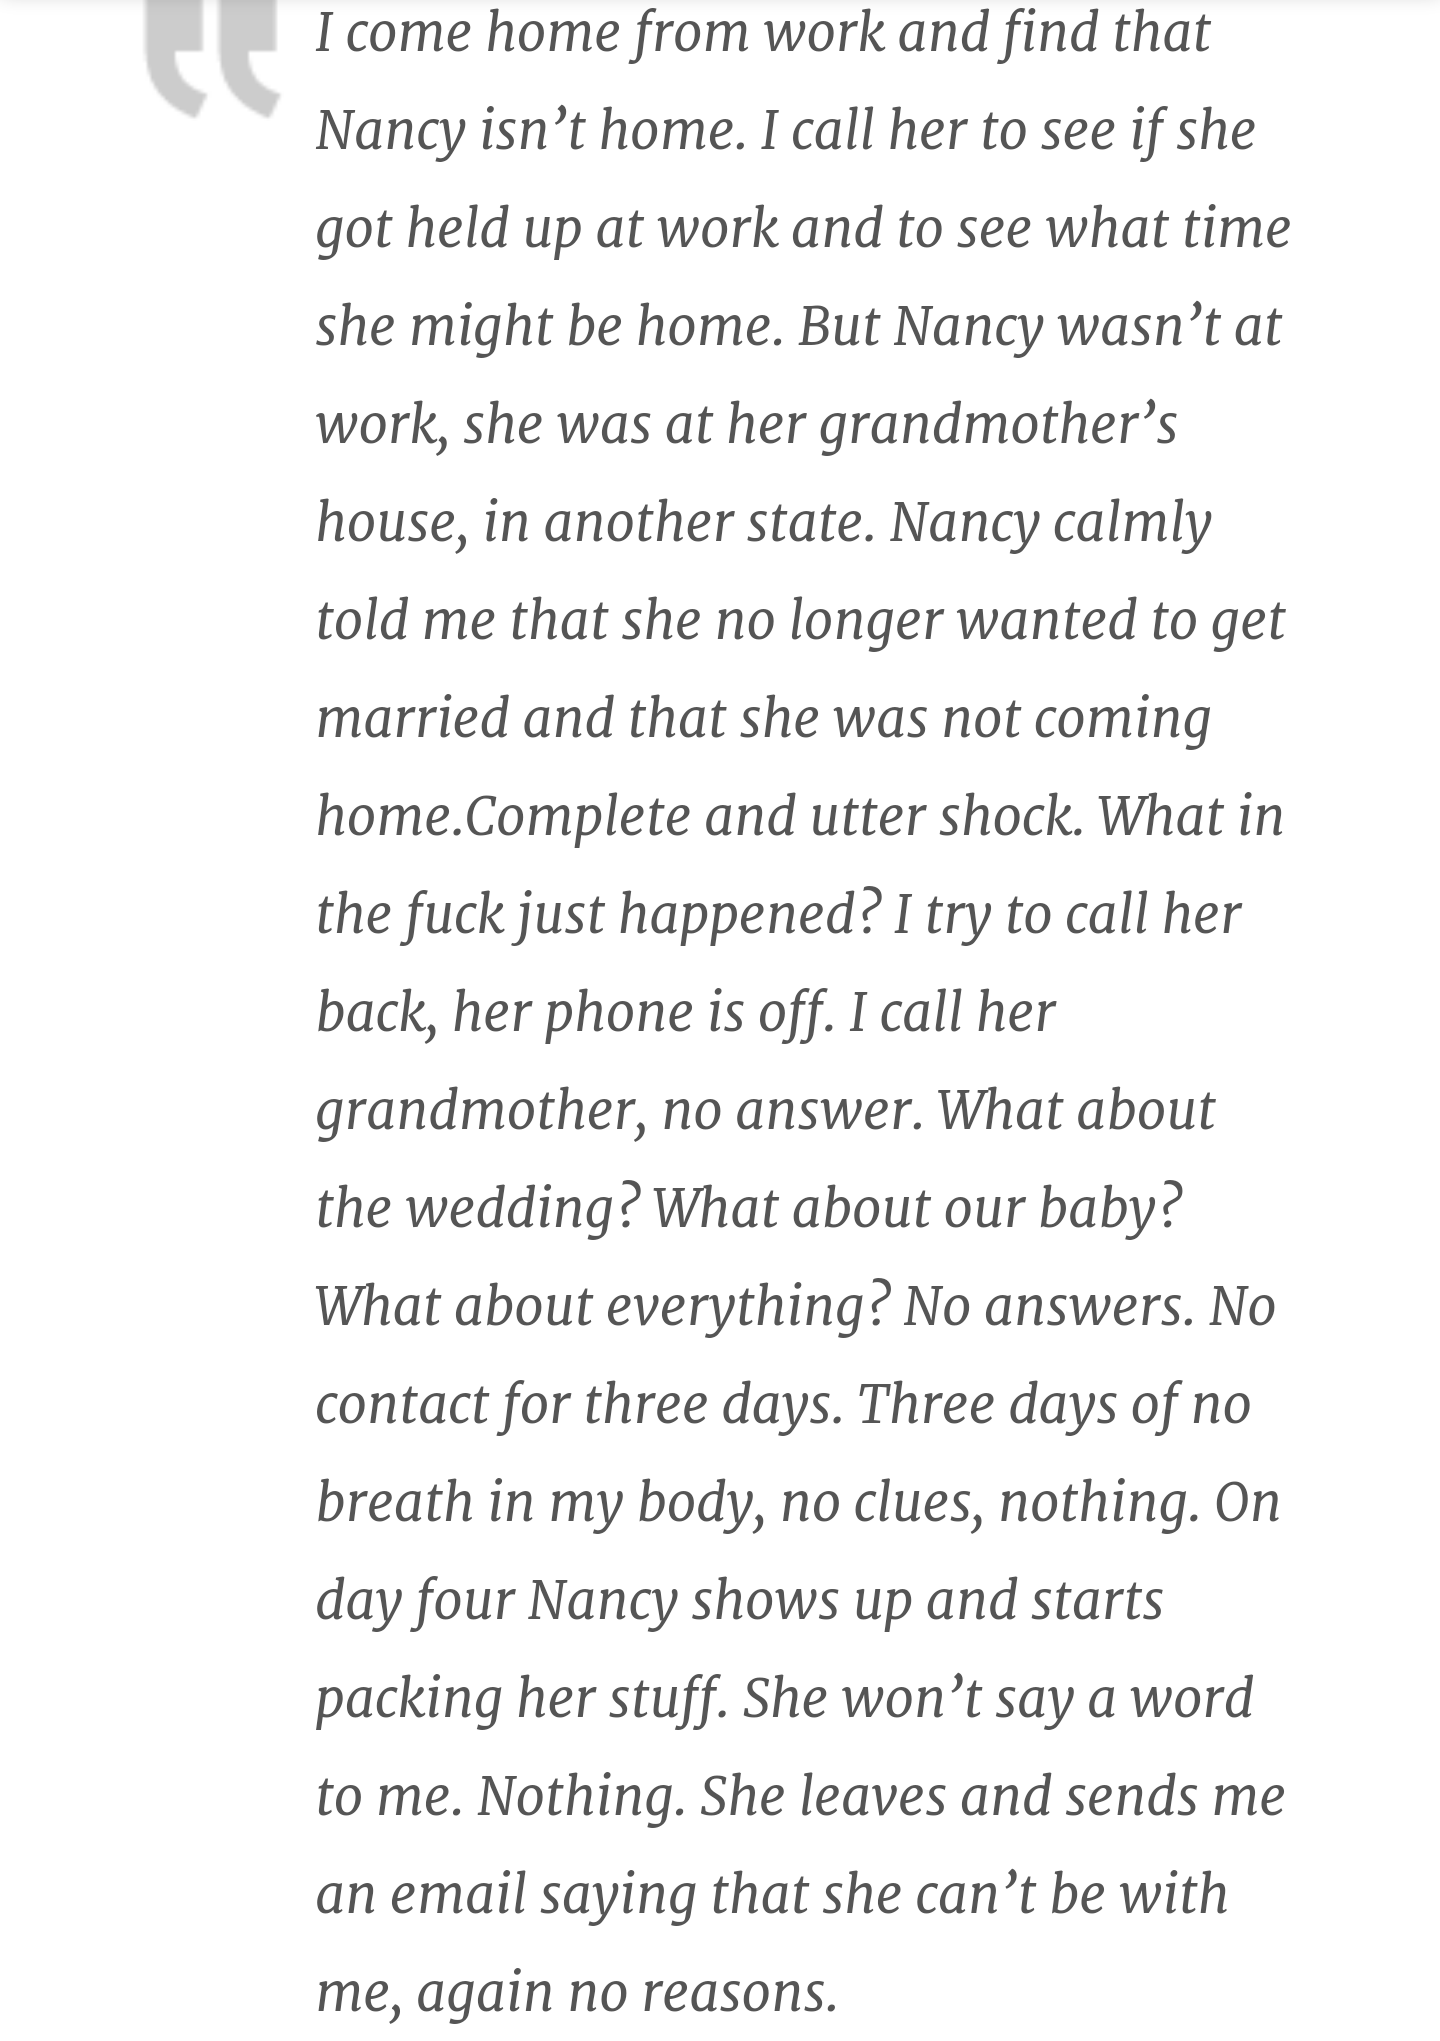 document - I come home from work and find that Nancy isn't home. I call her to see if she got held up at work and to see what time she might be home. But Nancy wasn't at work, she was at her grandmother's house, in another state. Nancy calmly told me that